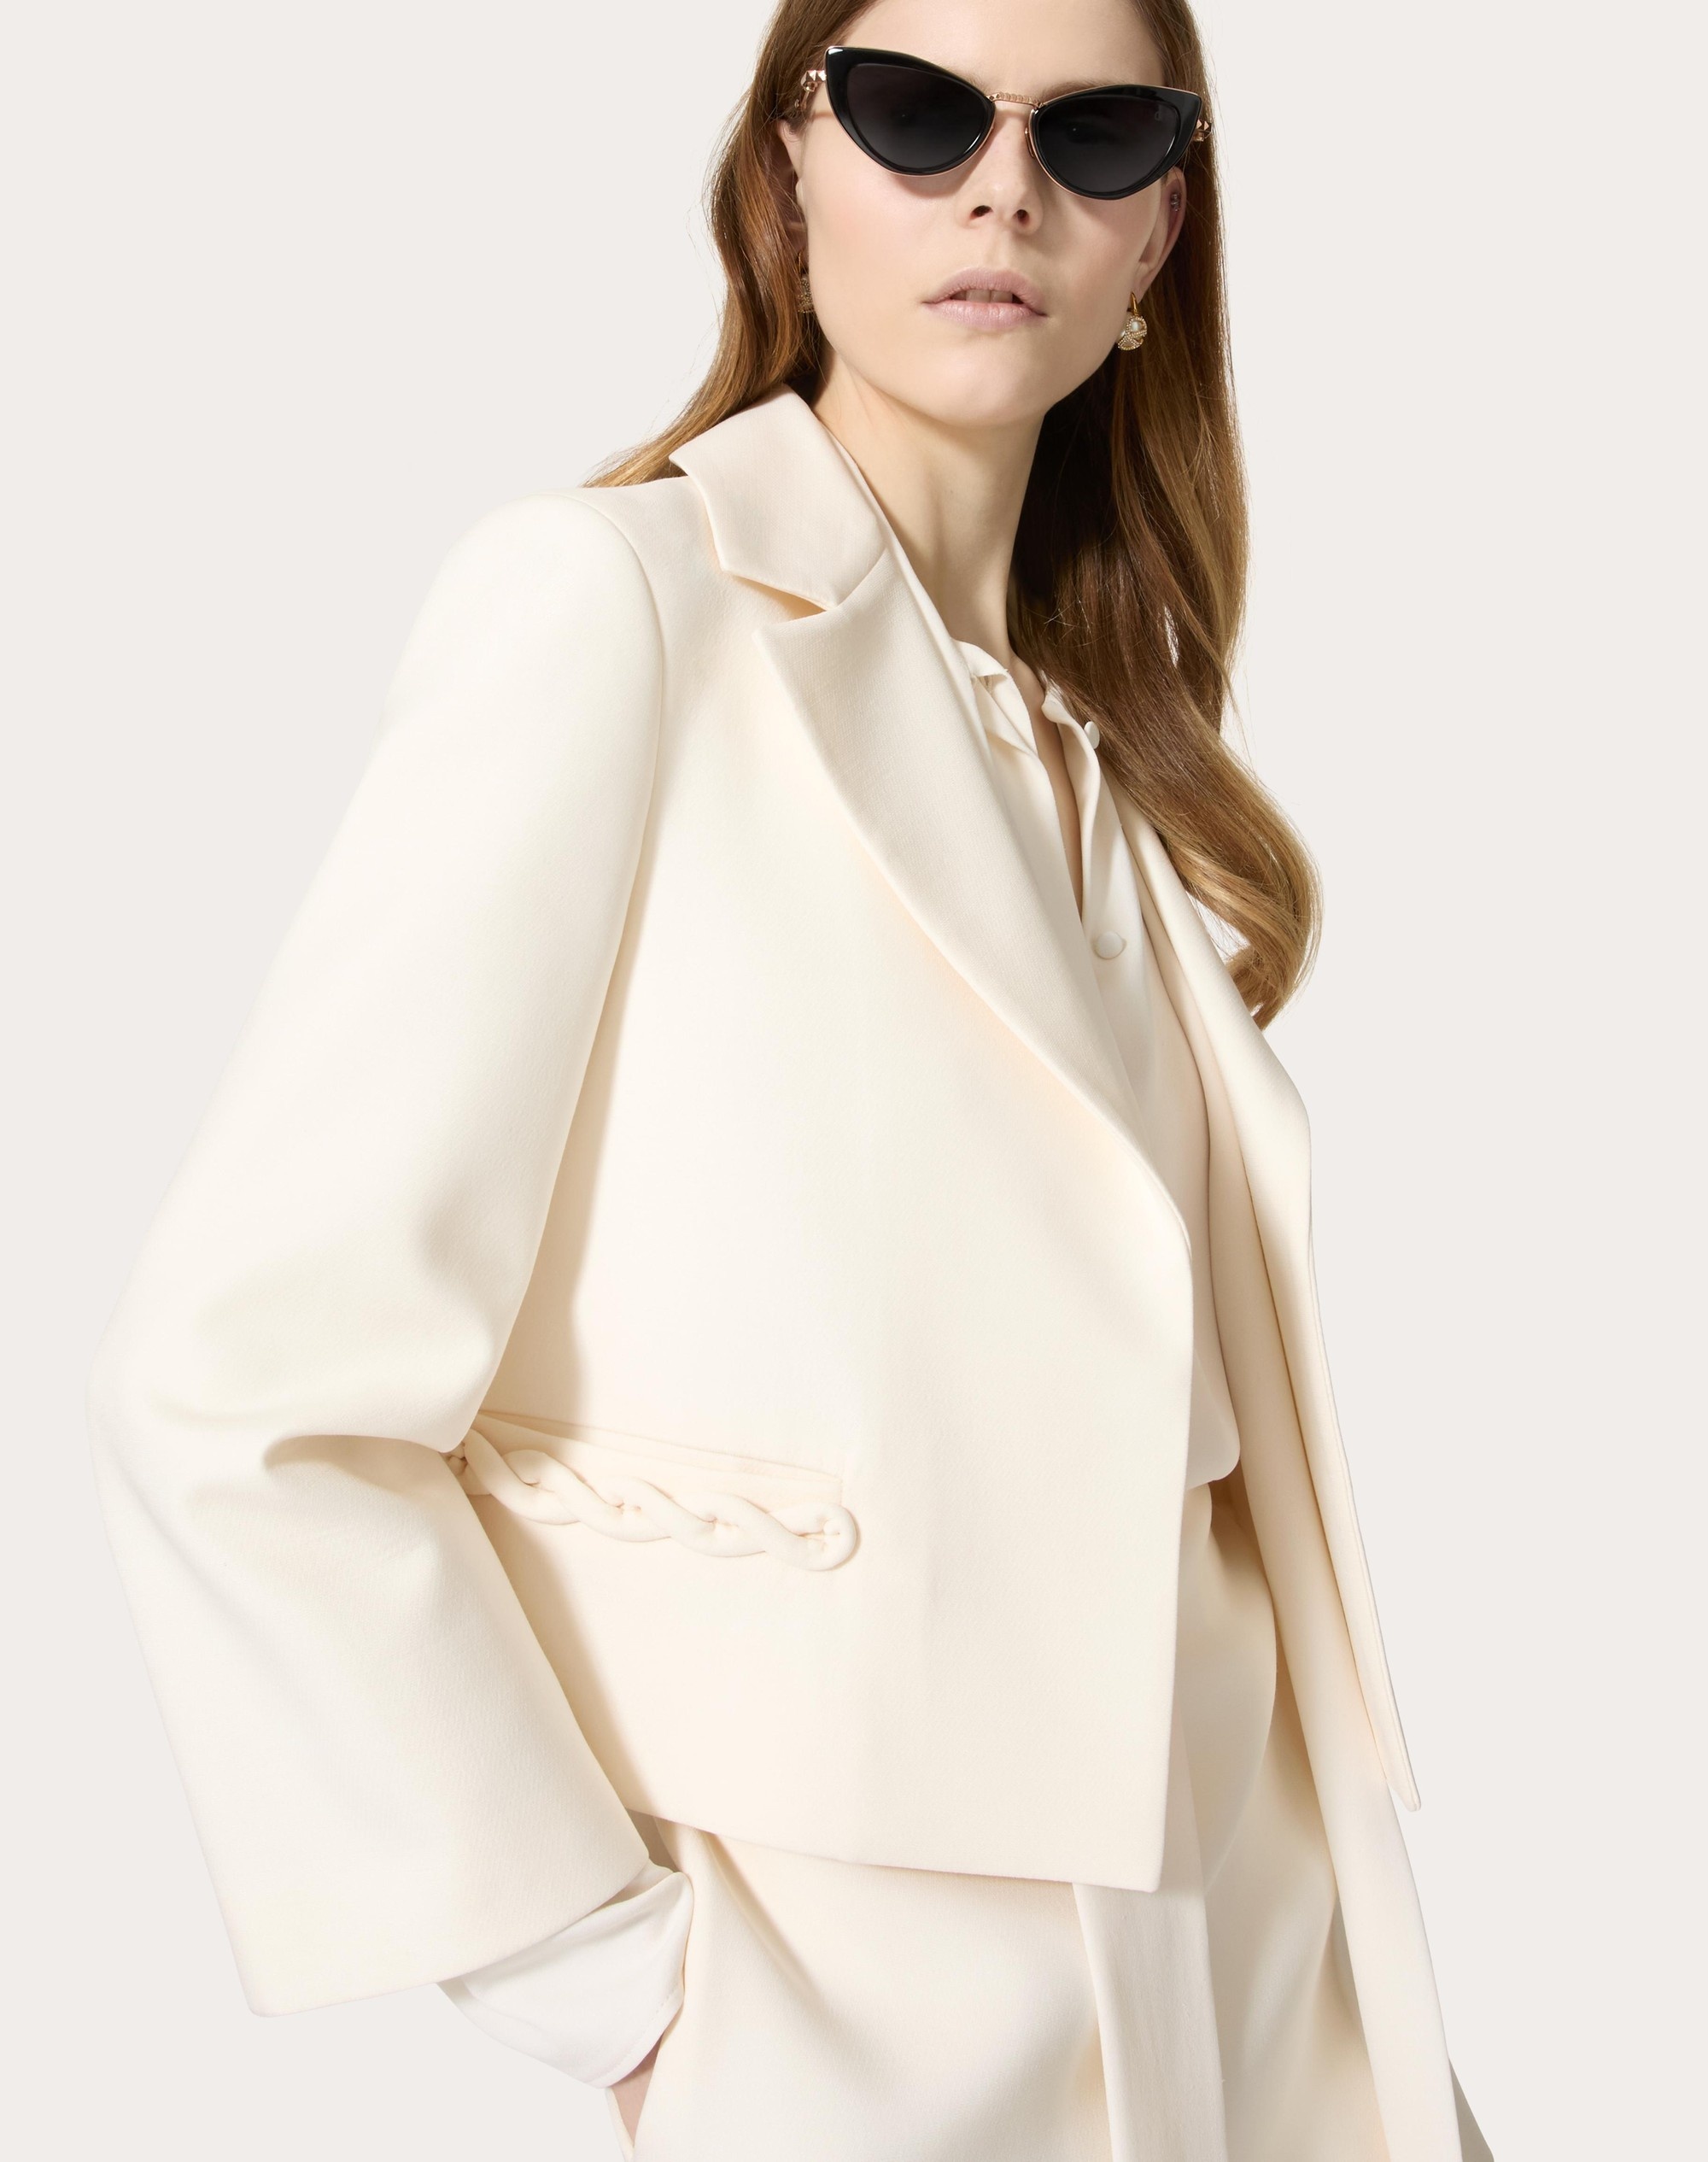 CREPE COUTURE JACKET - 5